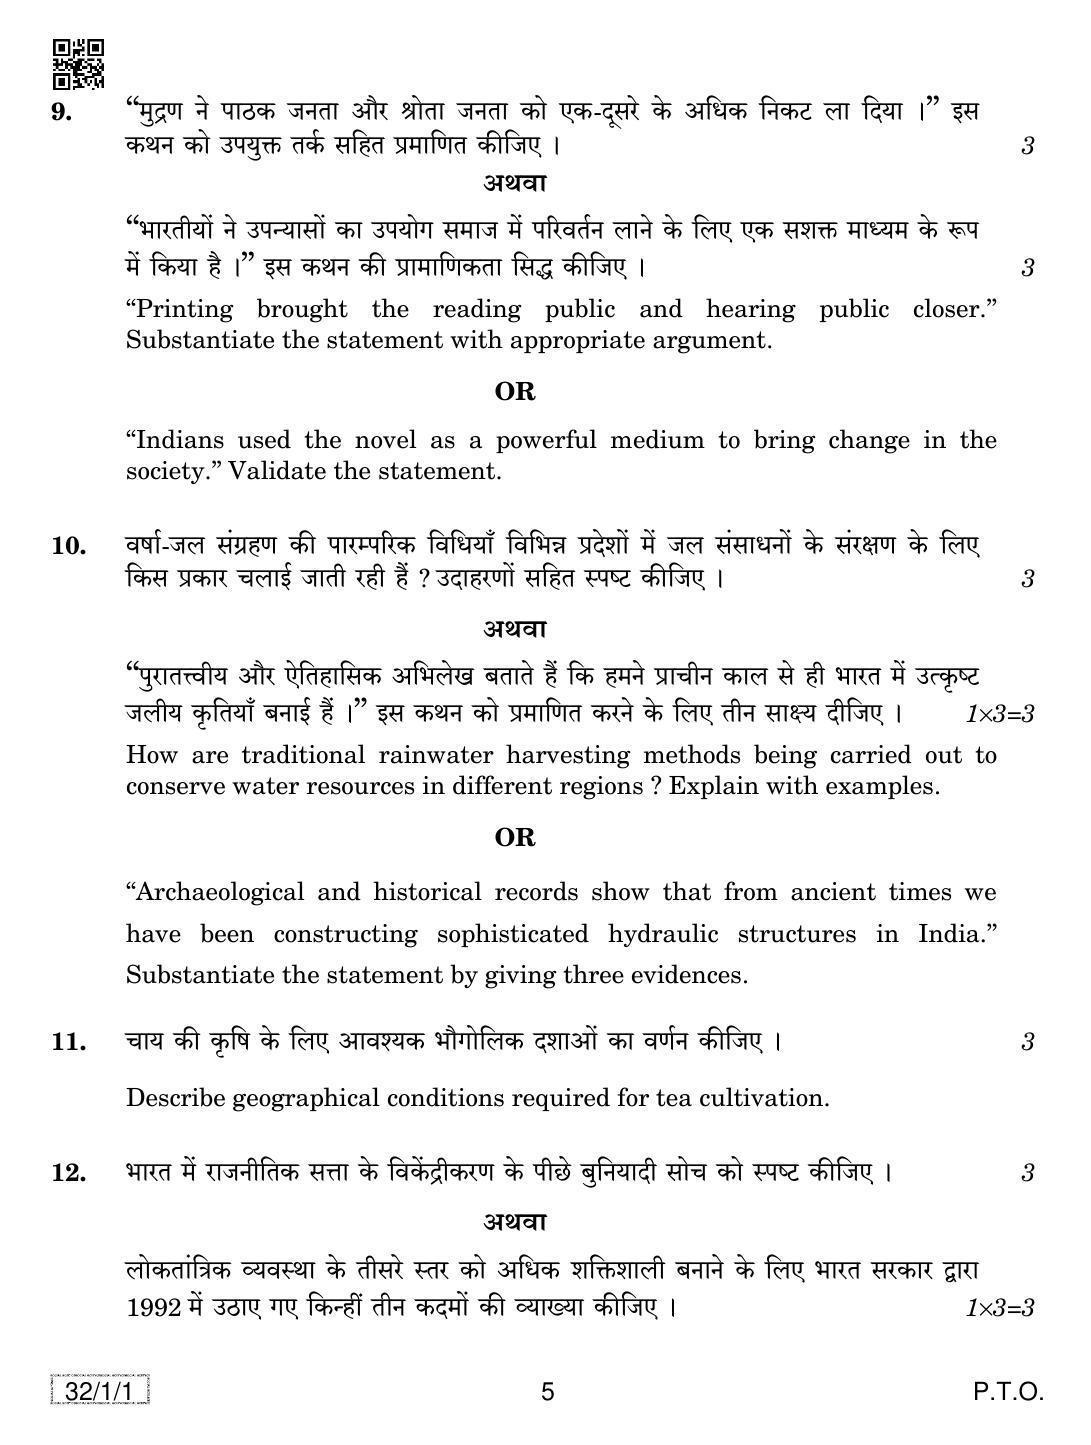 CBSE Class 10 32-1-1 SOCIAL SCIENCE 2019 Compartment Question Paper - Page 5